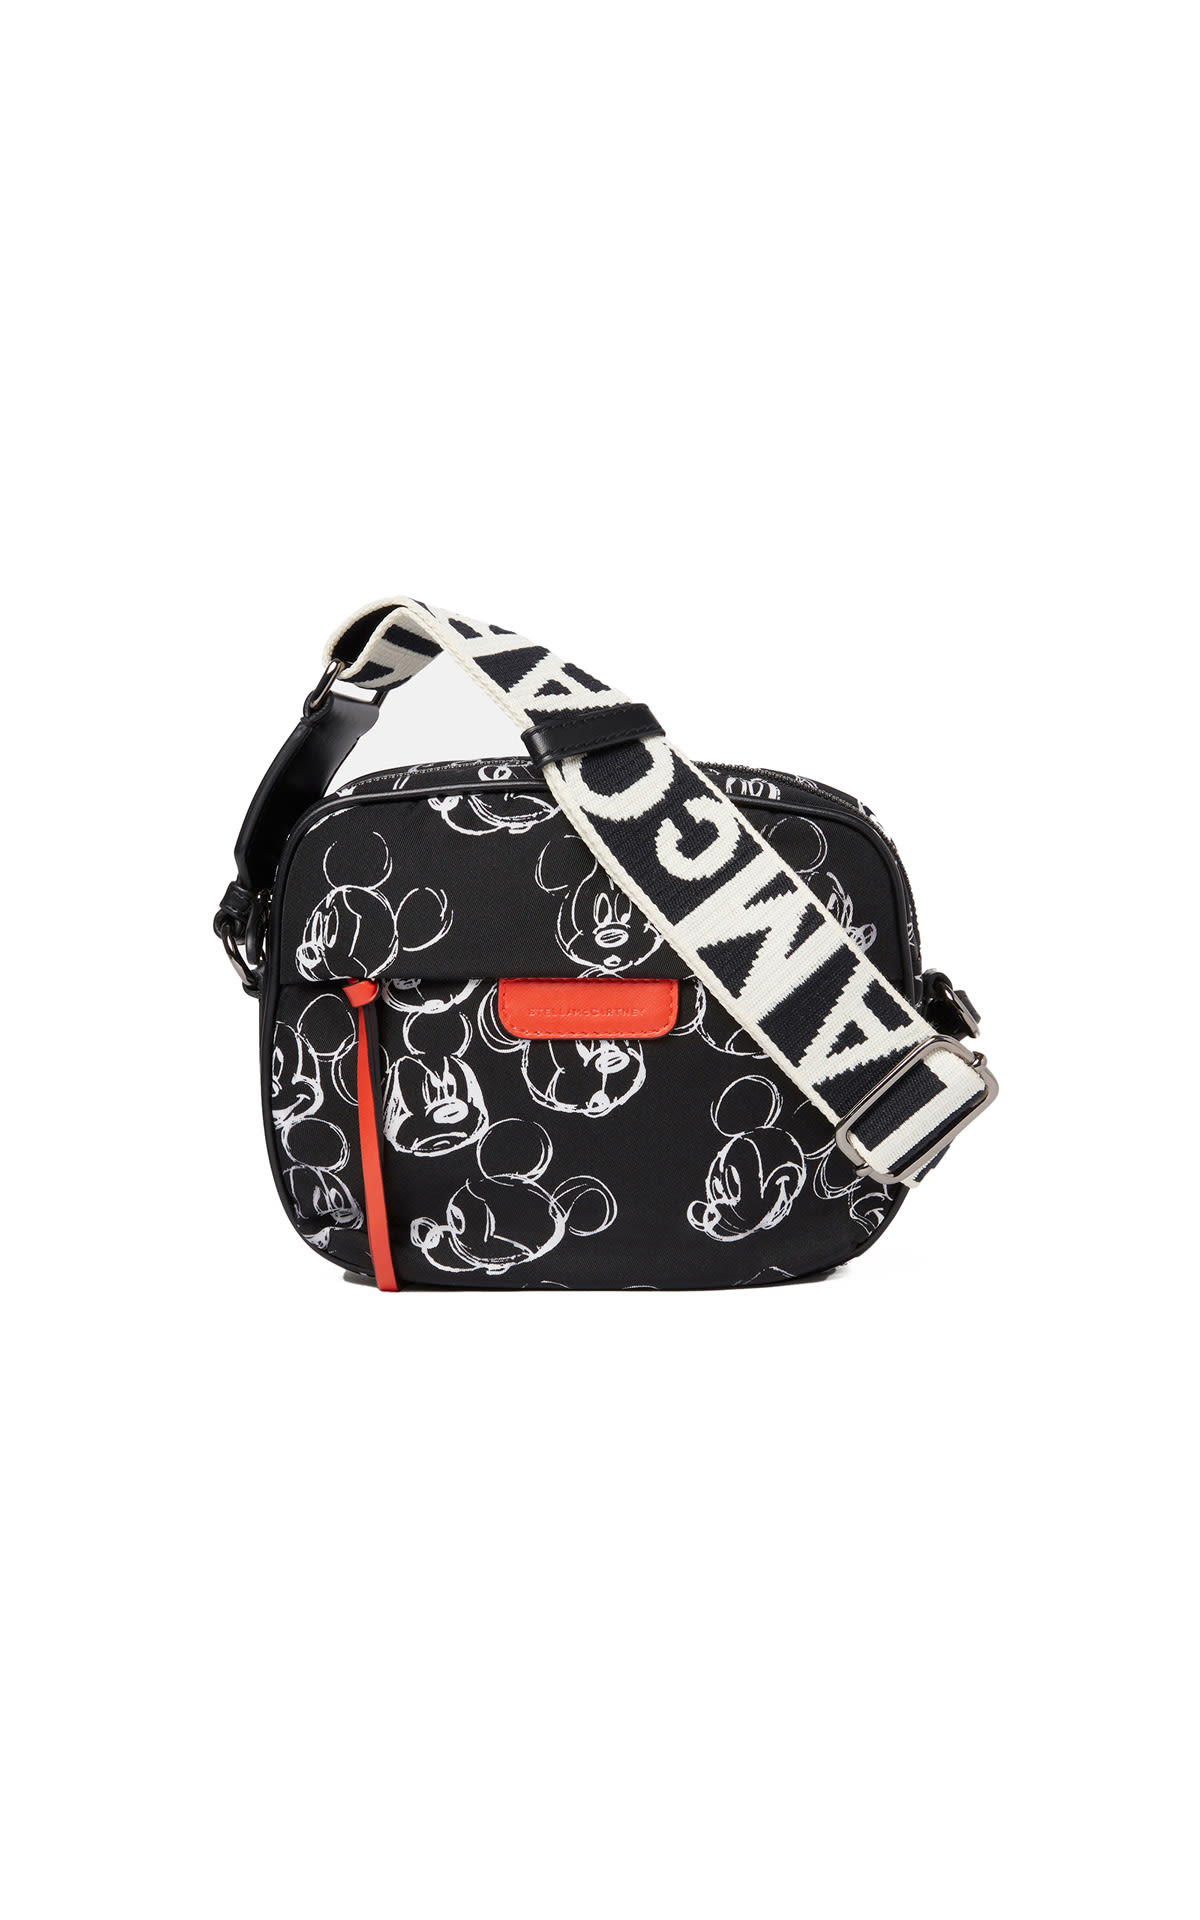 Stella McCartney Crossbody bag with print for Disney Fantasia of Mickey Mouse